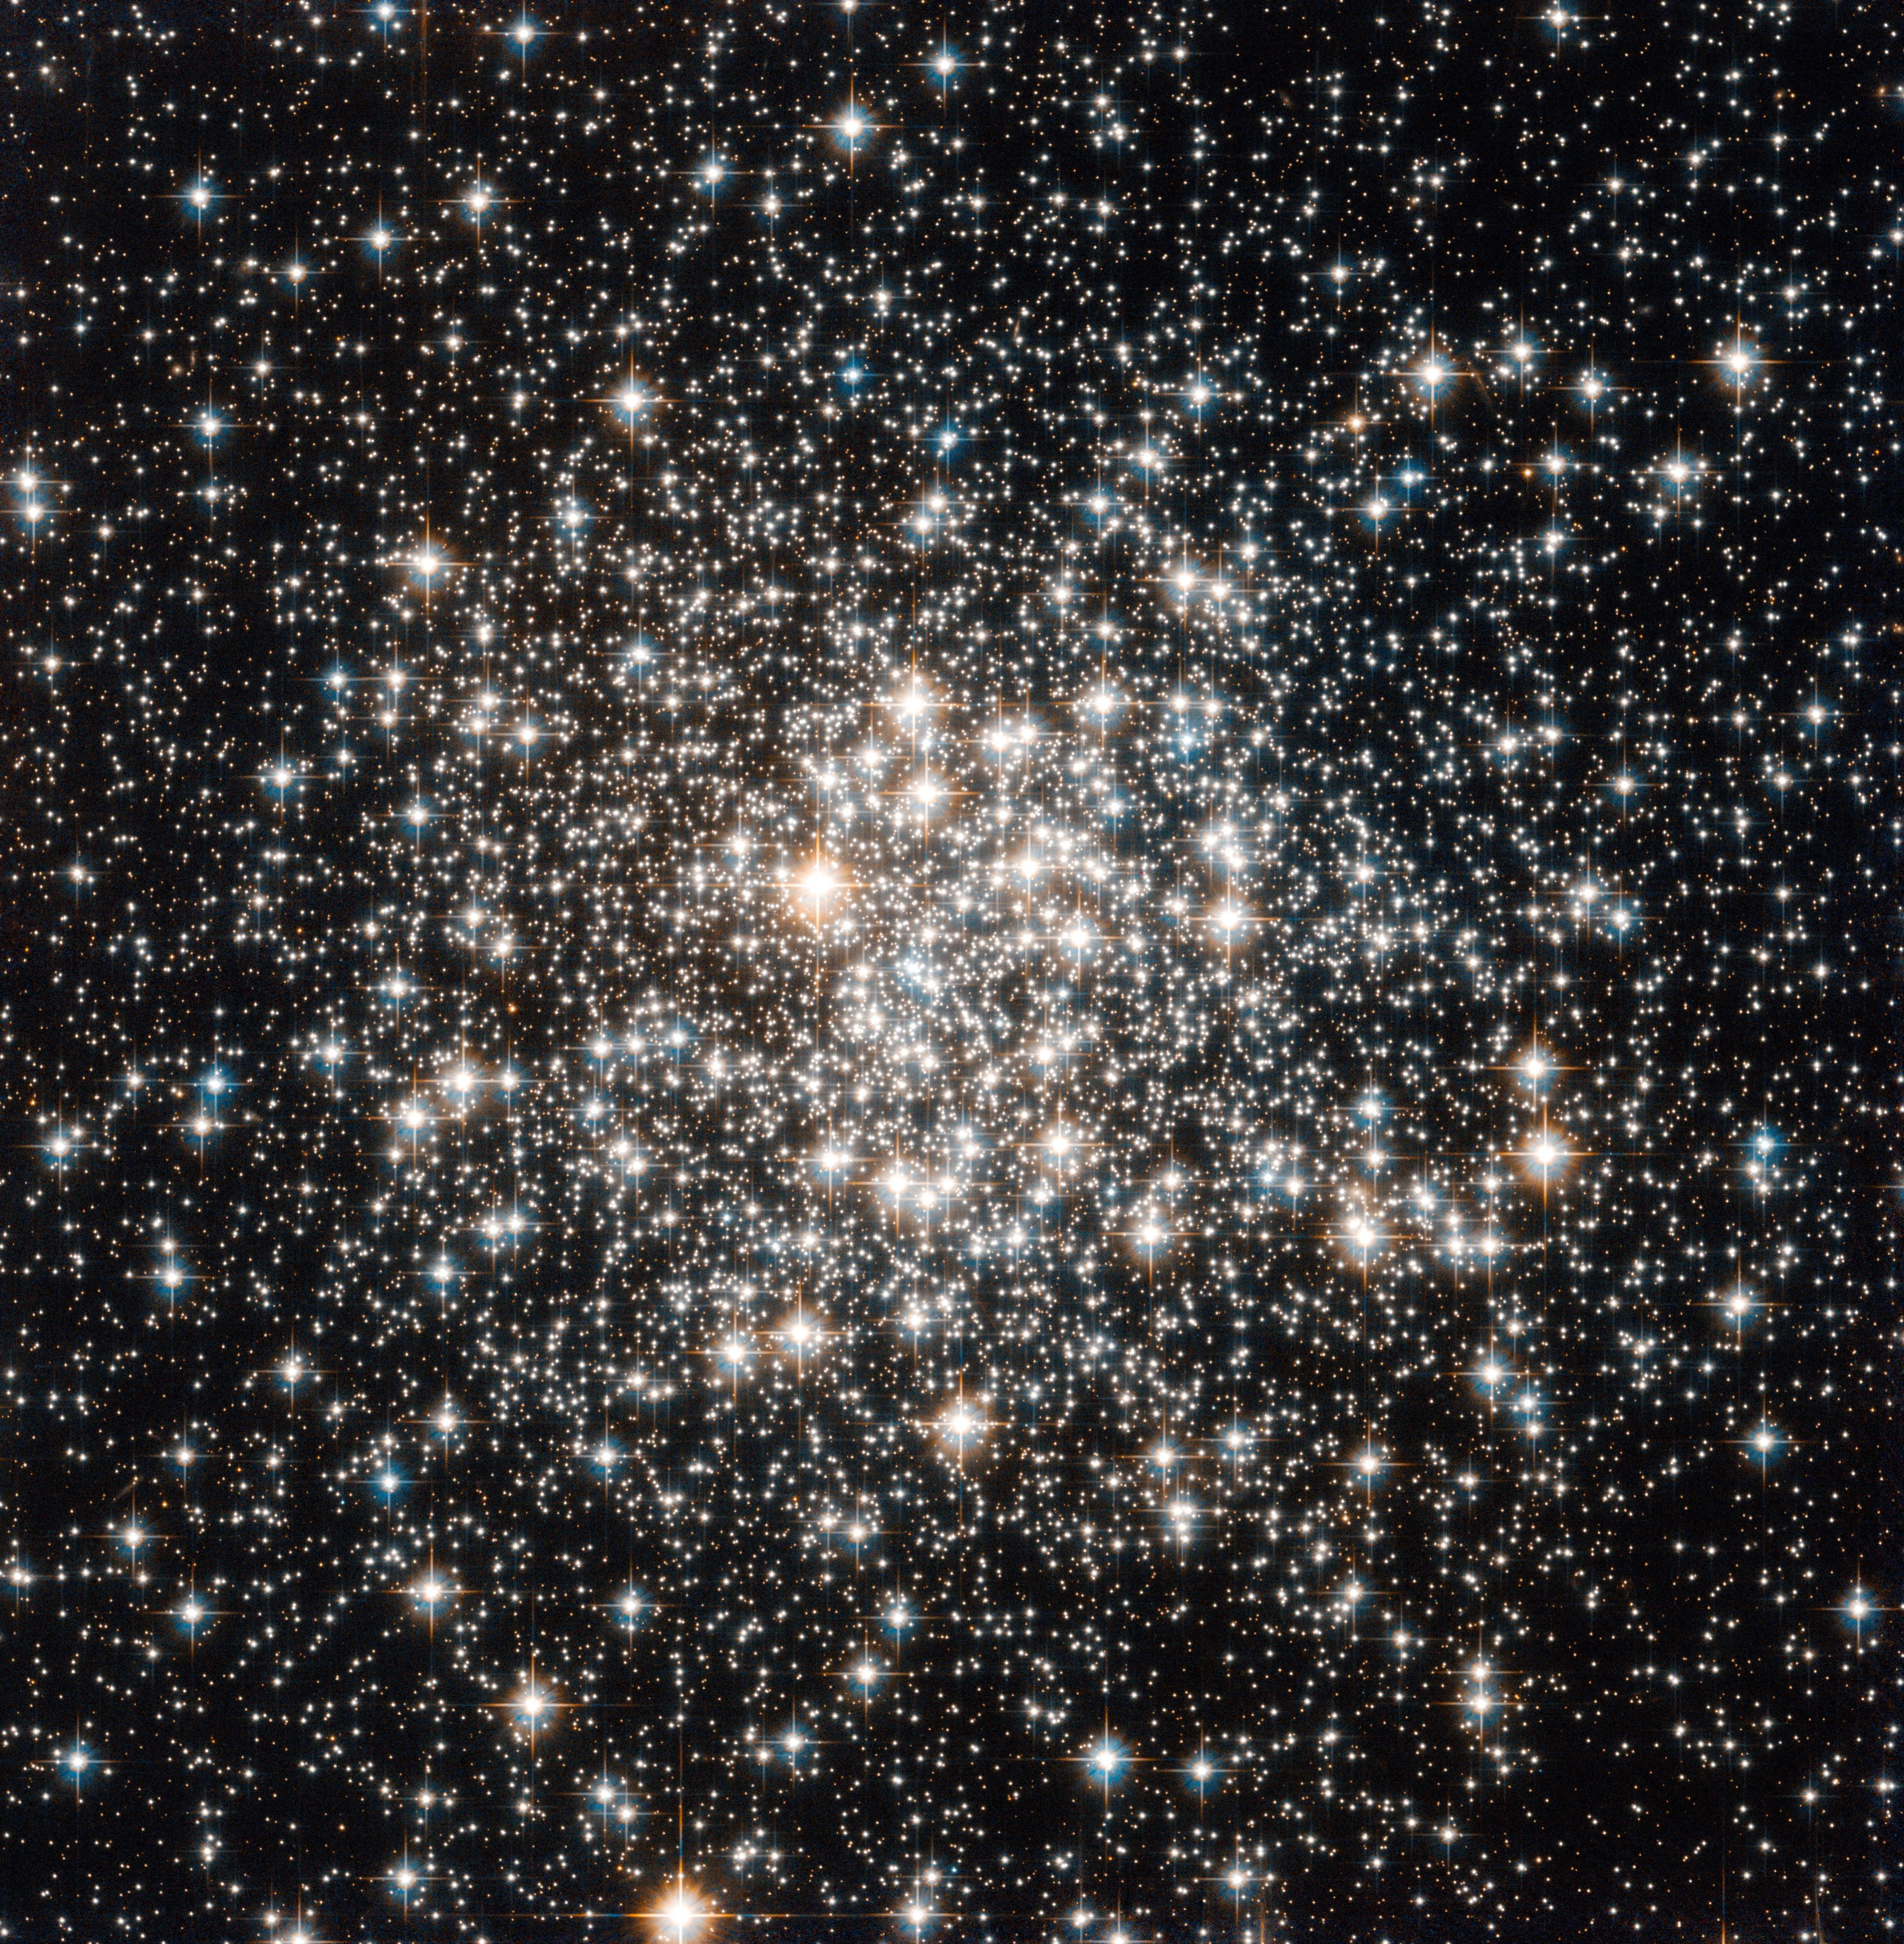 A bright cluster of white and yellow stars against black space.